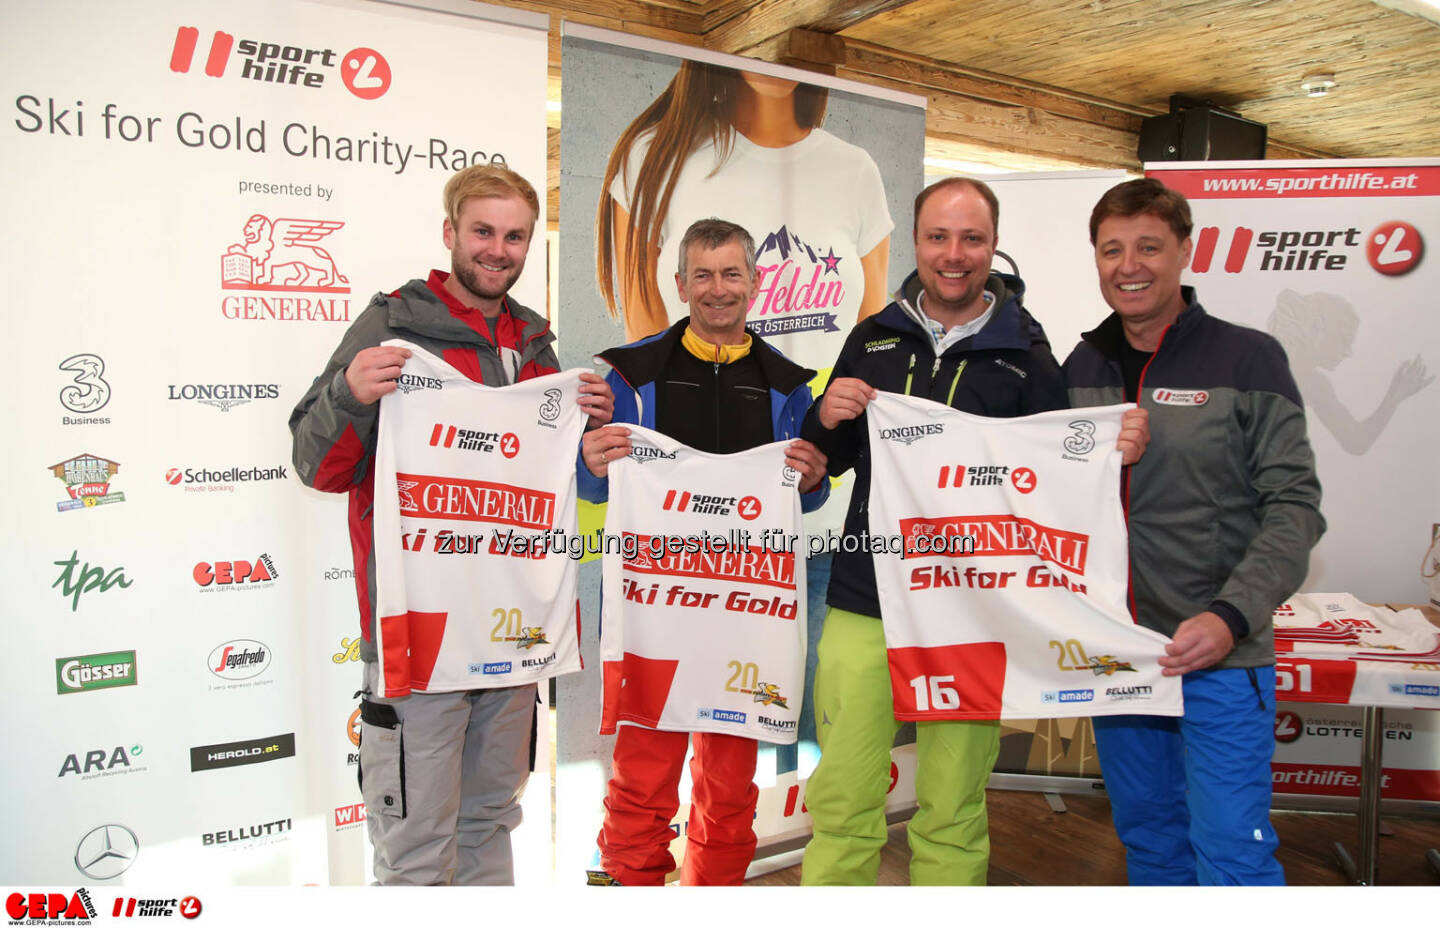 Ski for Gold Charity Race. Image shows Philipp Walcher, Gottlieb Stocker, Mathias Schattleitner and managing director Harald Bauer (Sporthilfe). Photo: GEPA pictures/ Harald Steiner